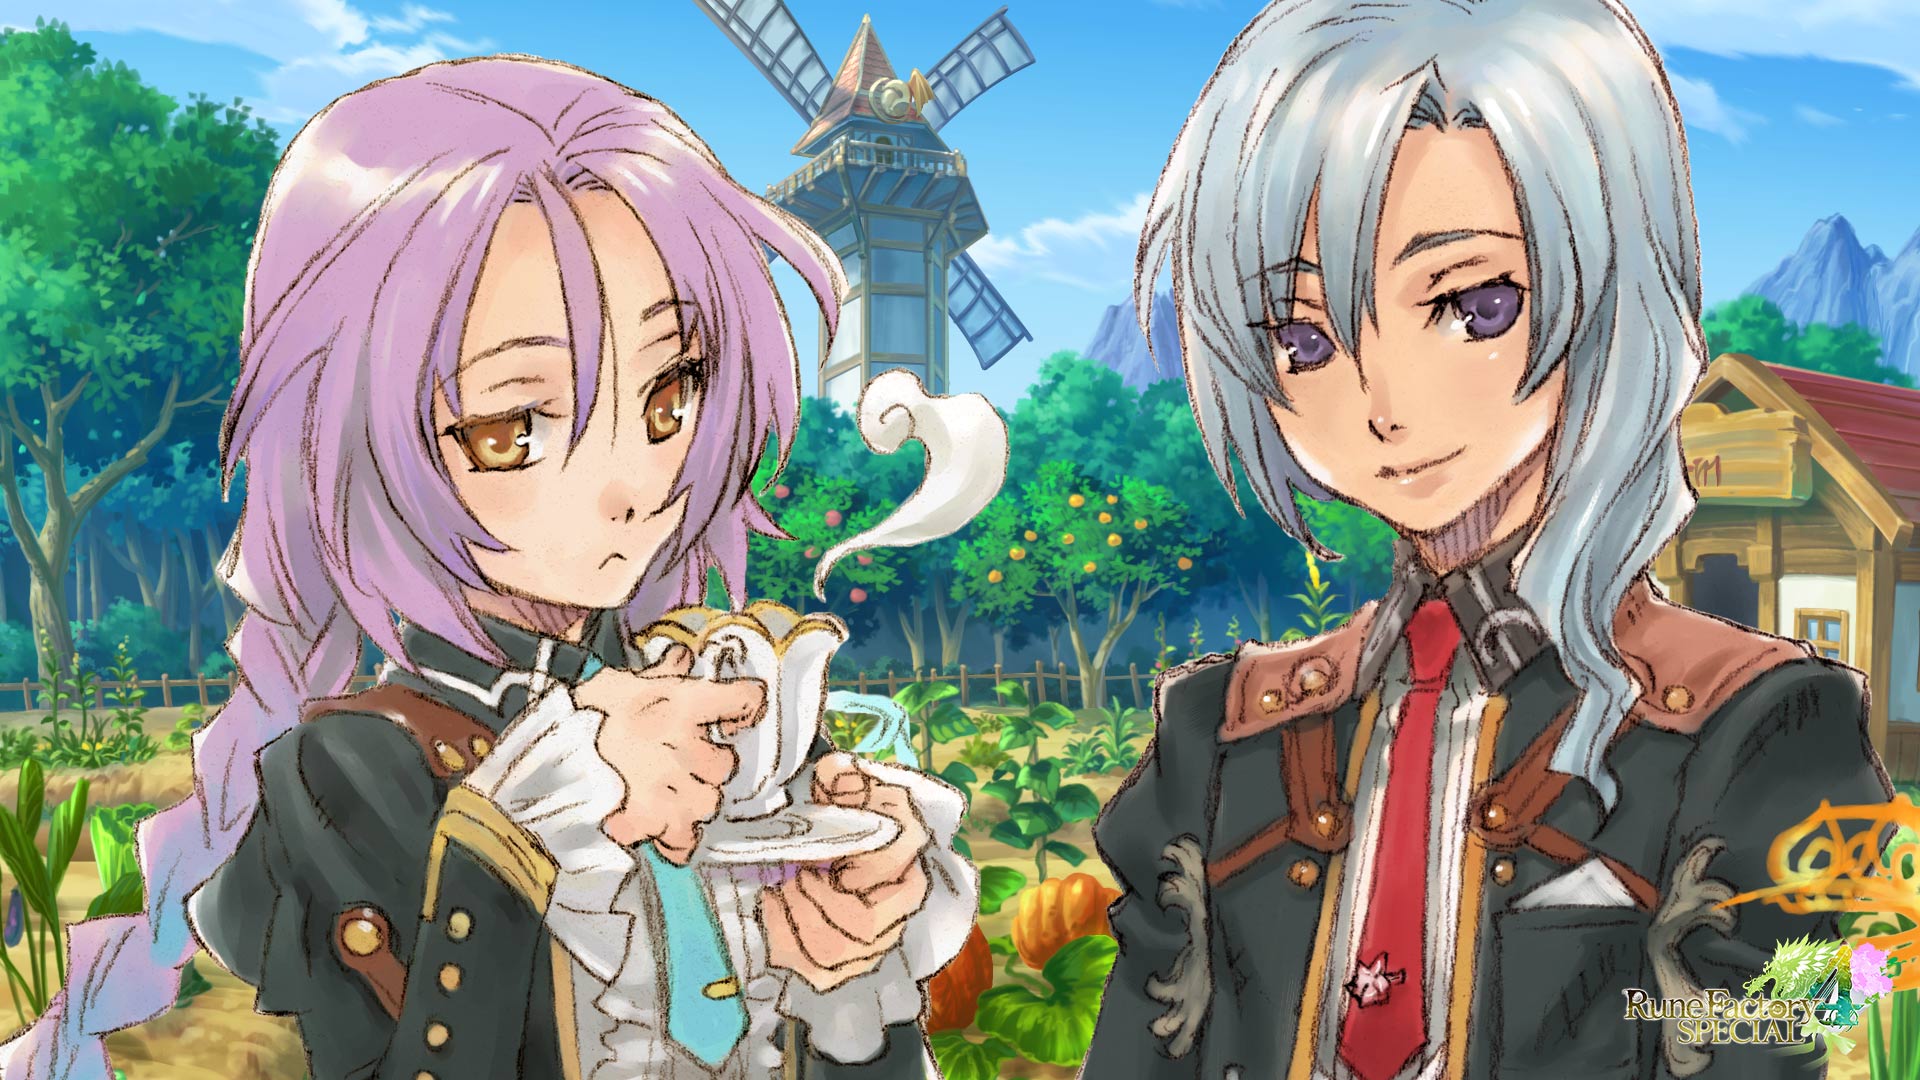 Hd desktop video game rune factory special download free picture